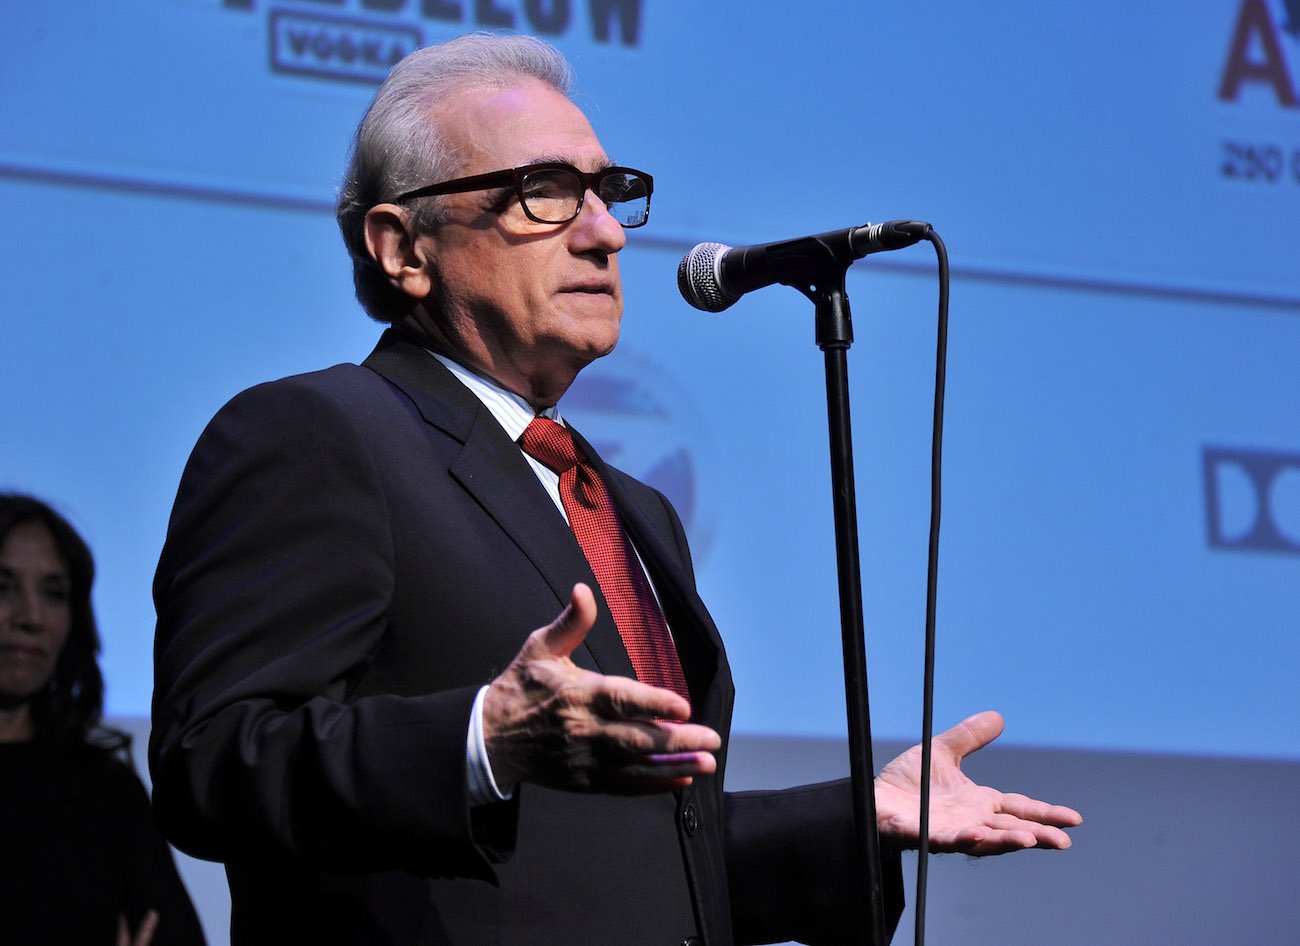 Martin Scorsese at the HBO screening of 'George Harrison: Living in the Material World' in 2011.